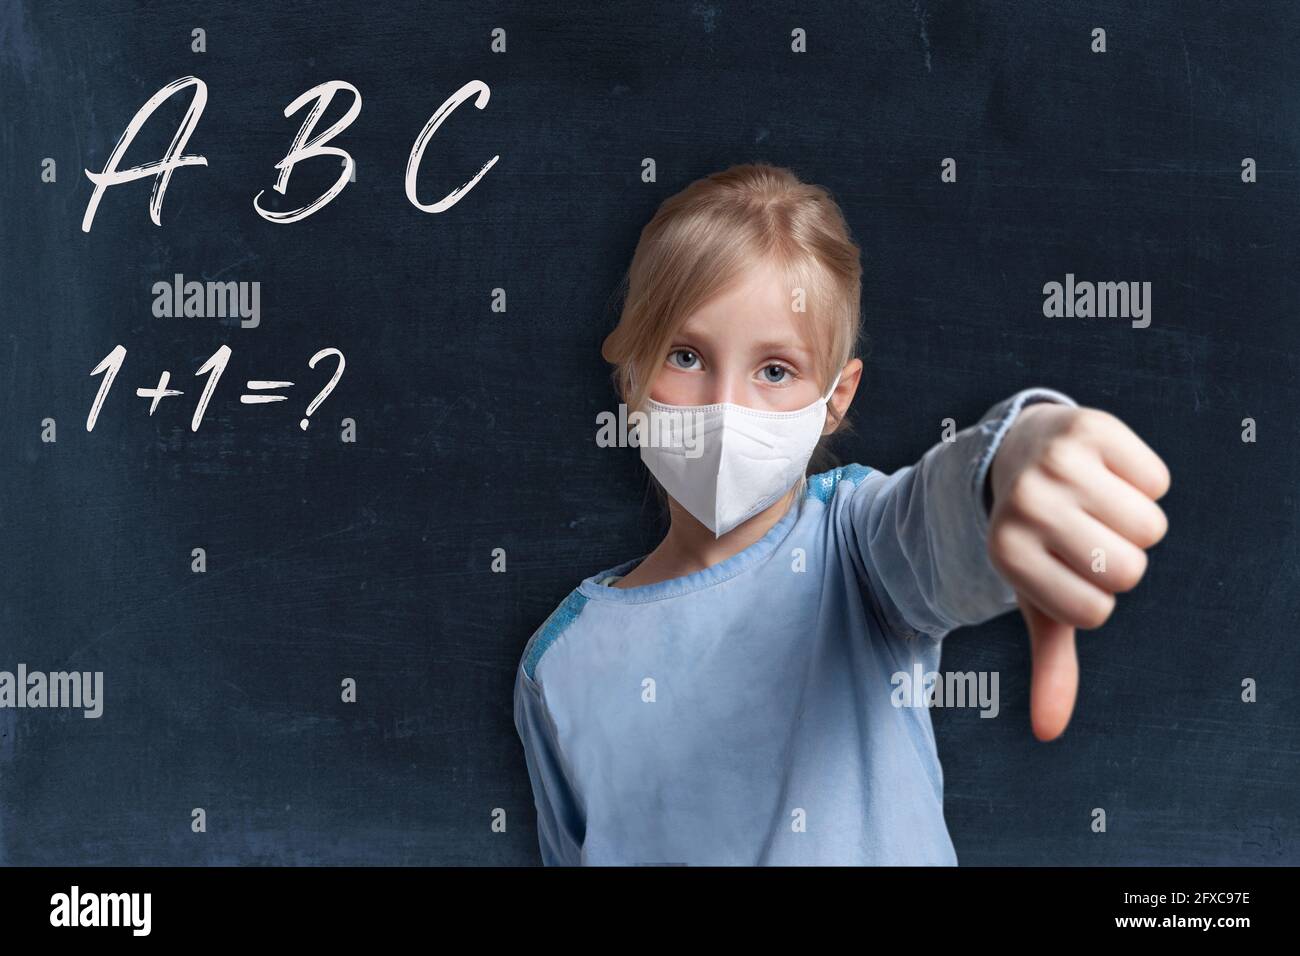 Girl showing thumbs down gesture wearing face mask against black background with alphabets and maths problem Stock Photo